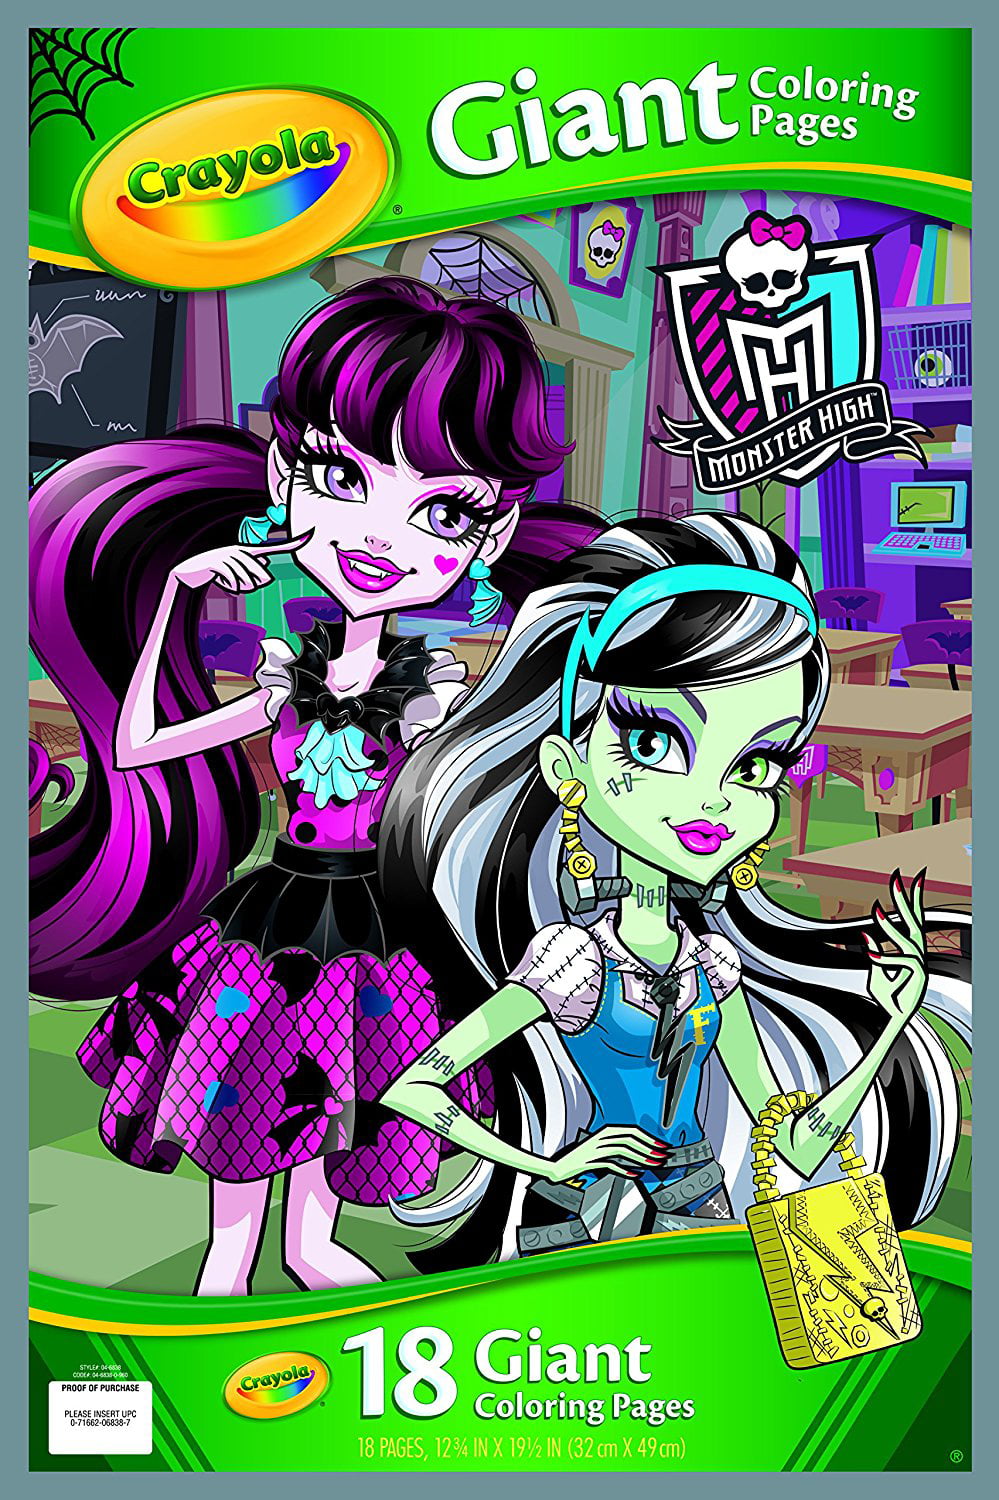 Crayola Monster High Giant Coloring Pages - Walmart.com